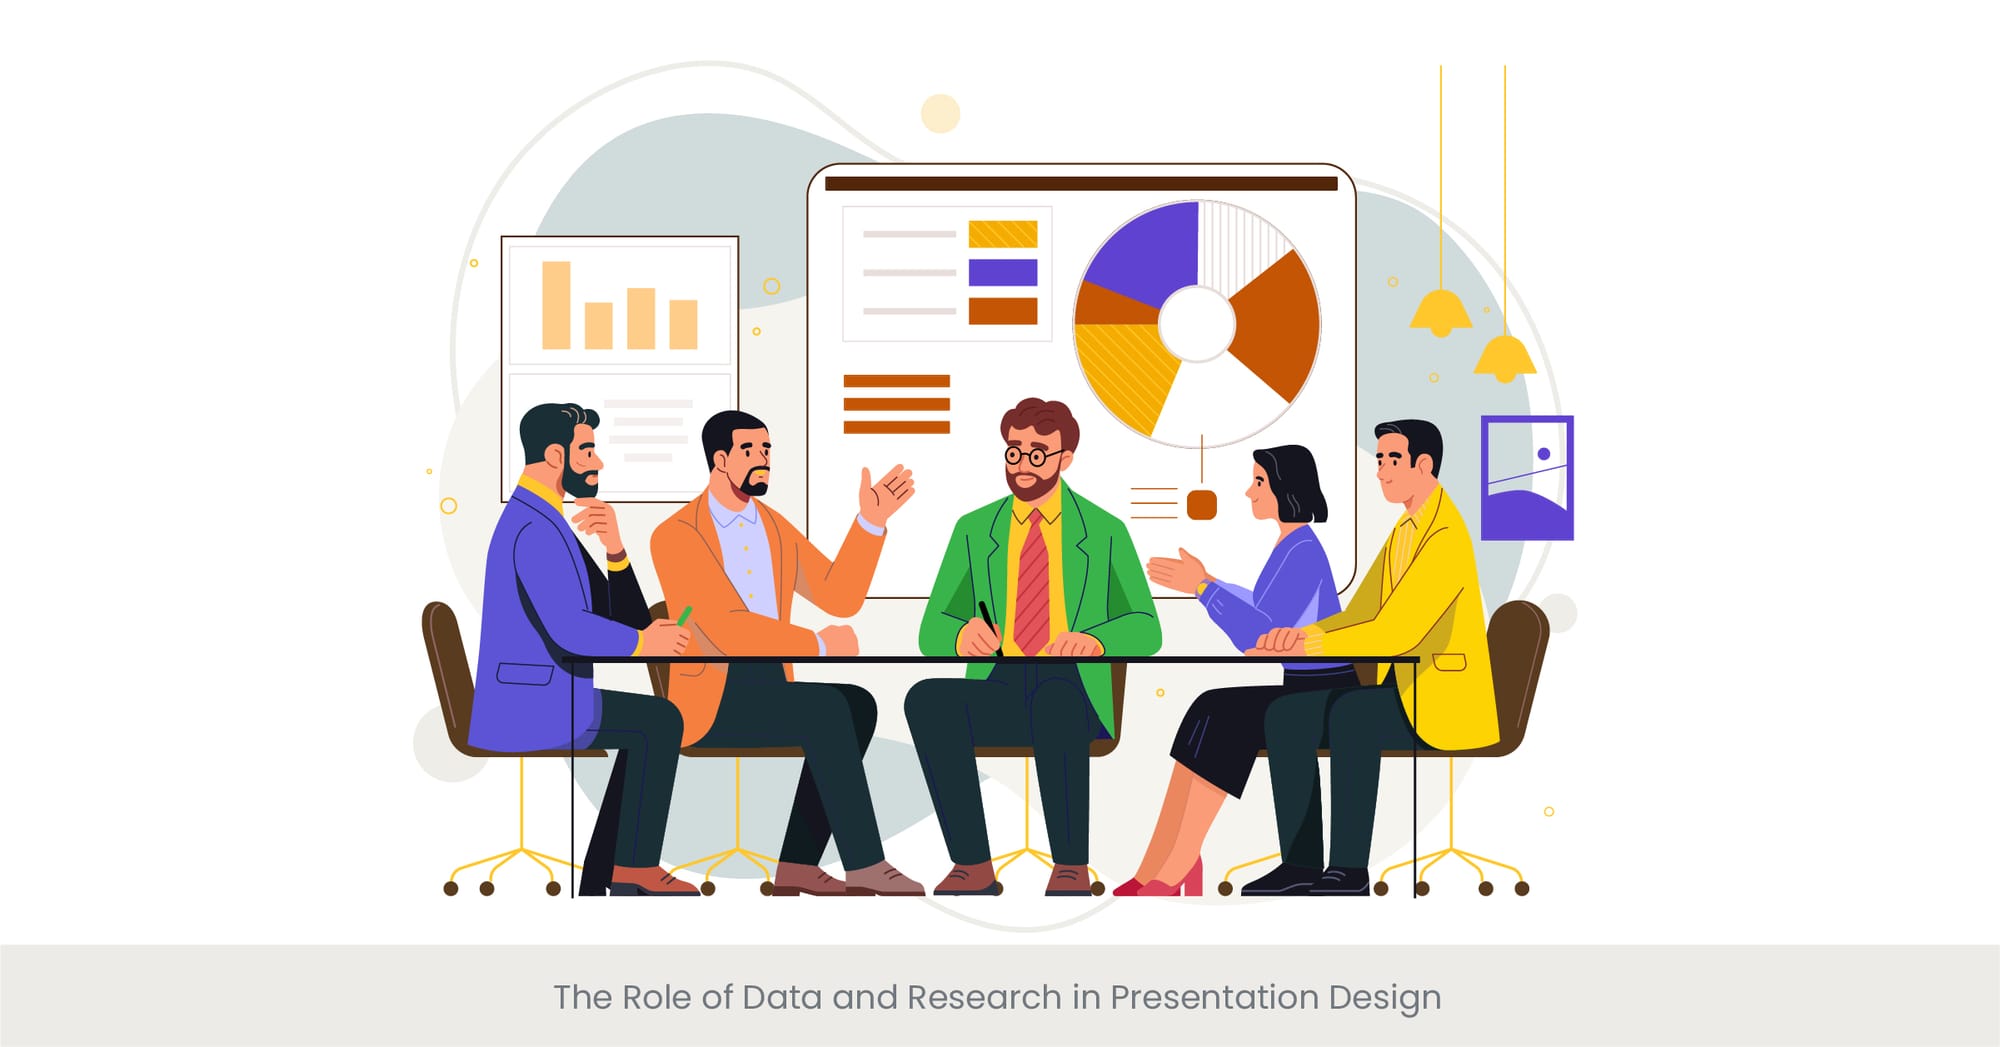 The Role of Data and Research in Presentation Design